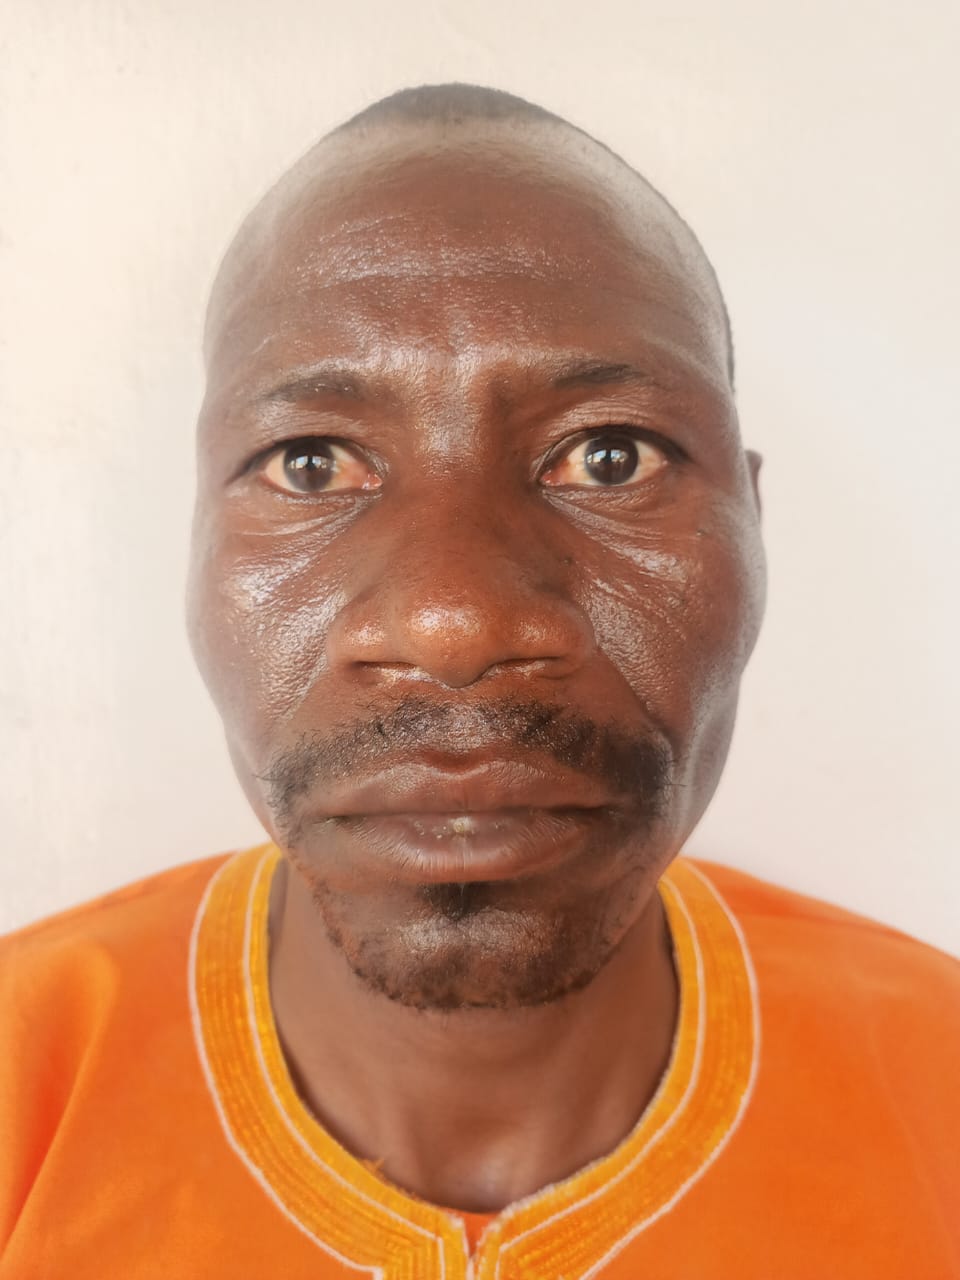 Man arrested in Adamawa for allegedly killing court clerk who went to serve him with court summons